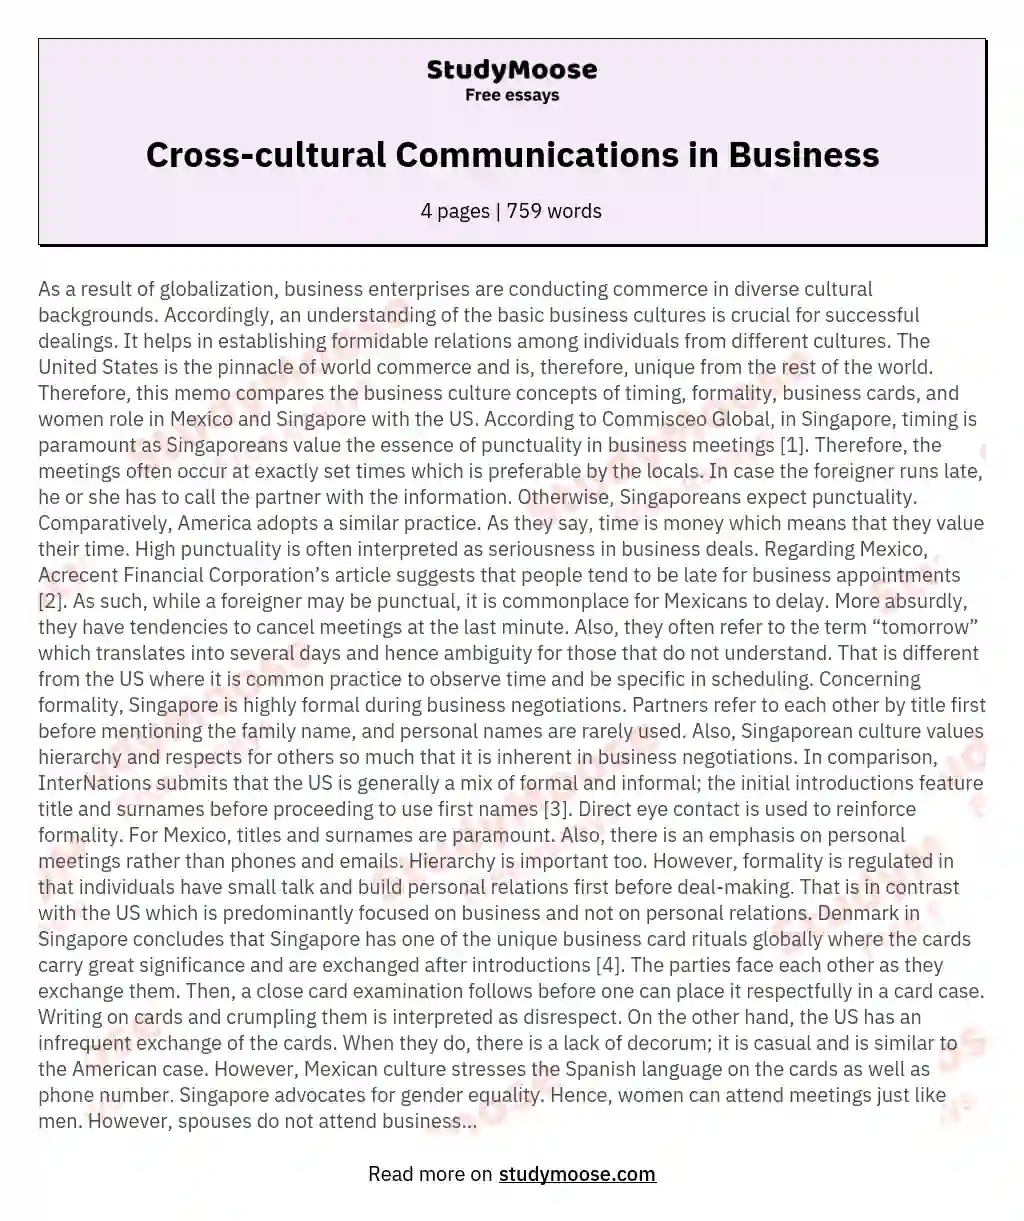 Cross-cultural Communications in Business essay